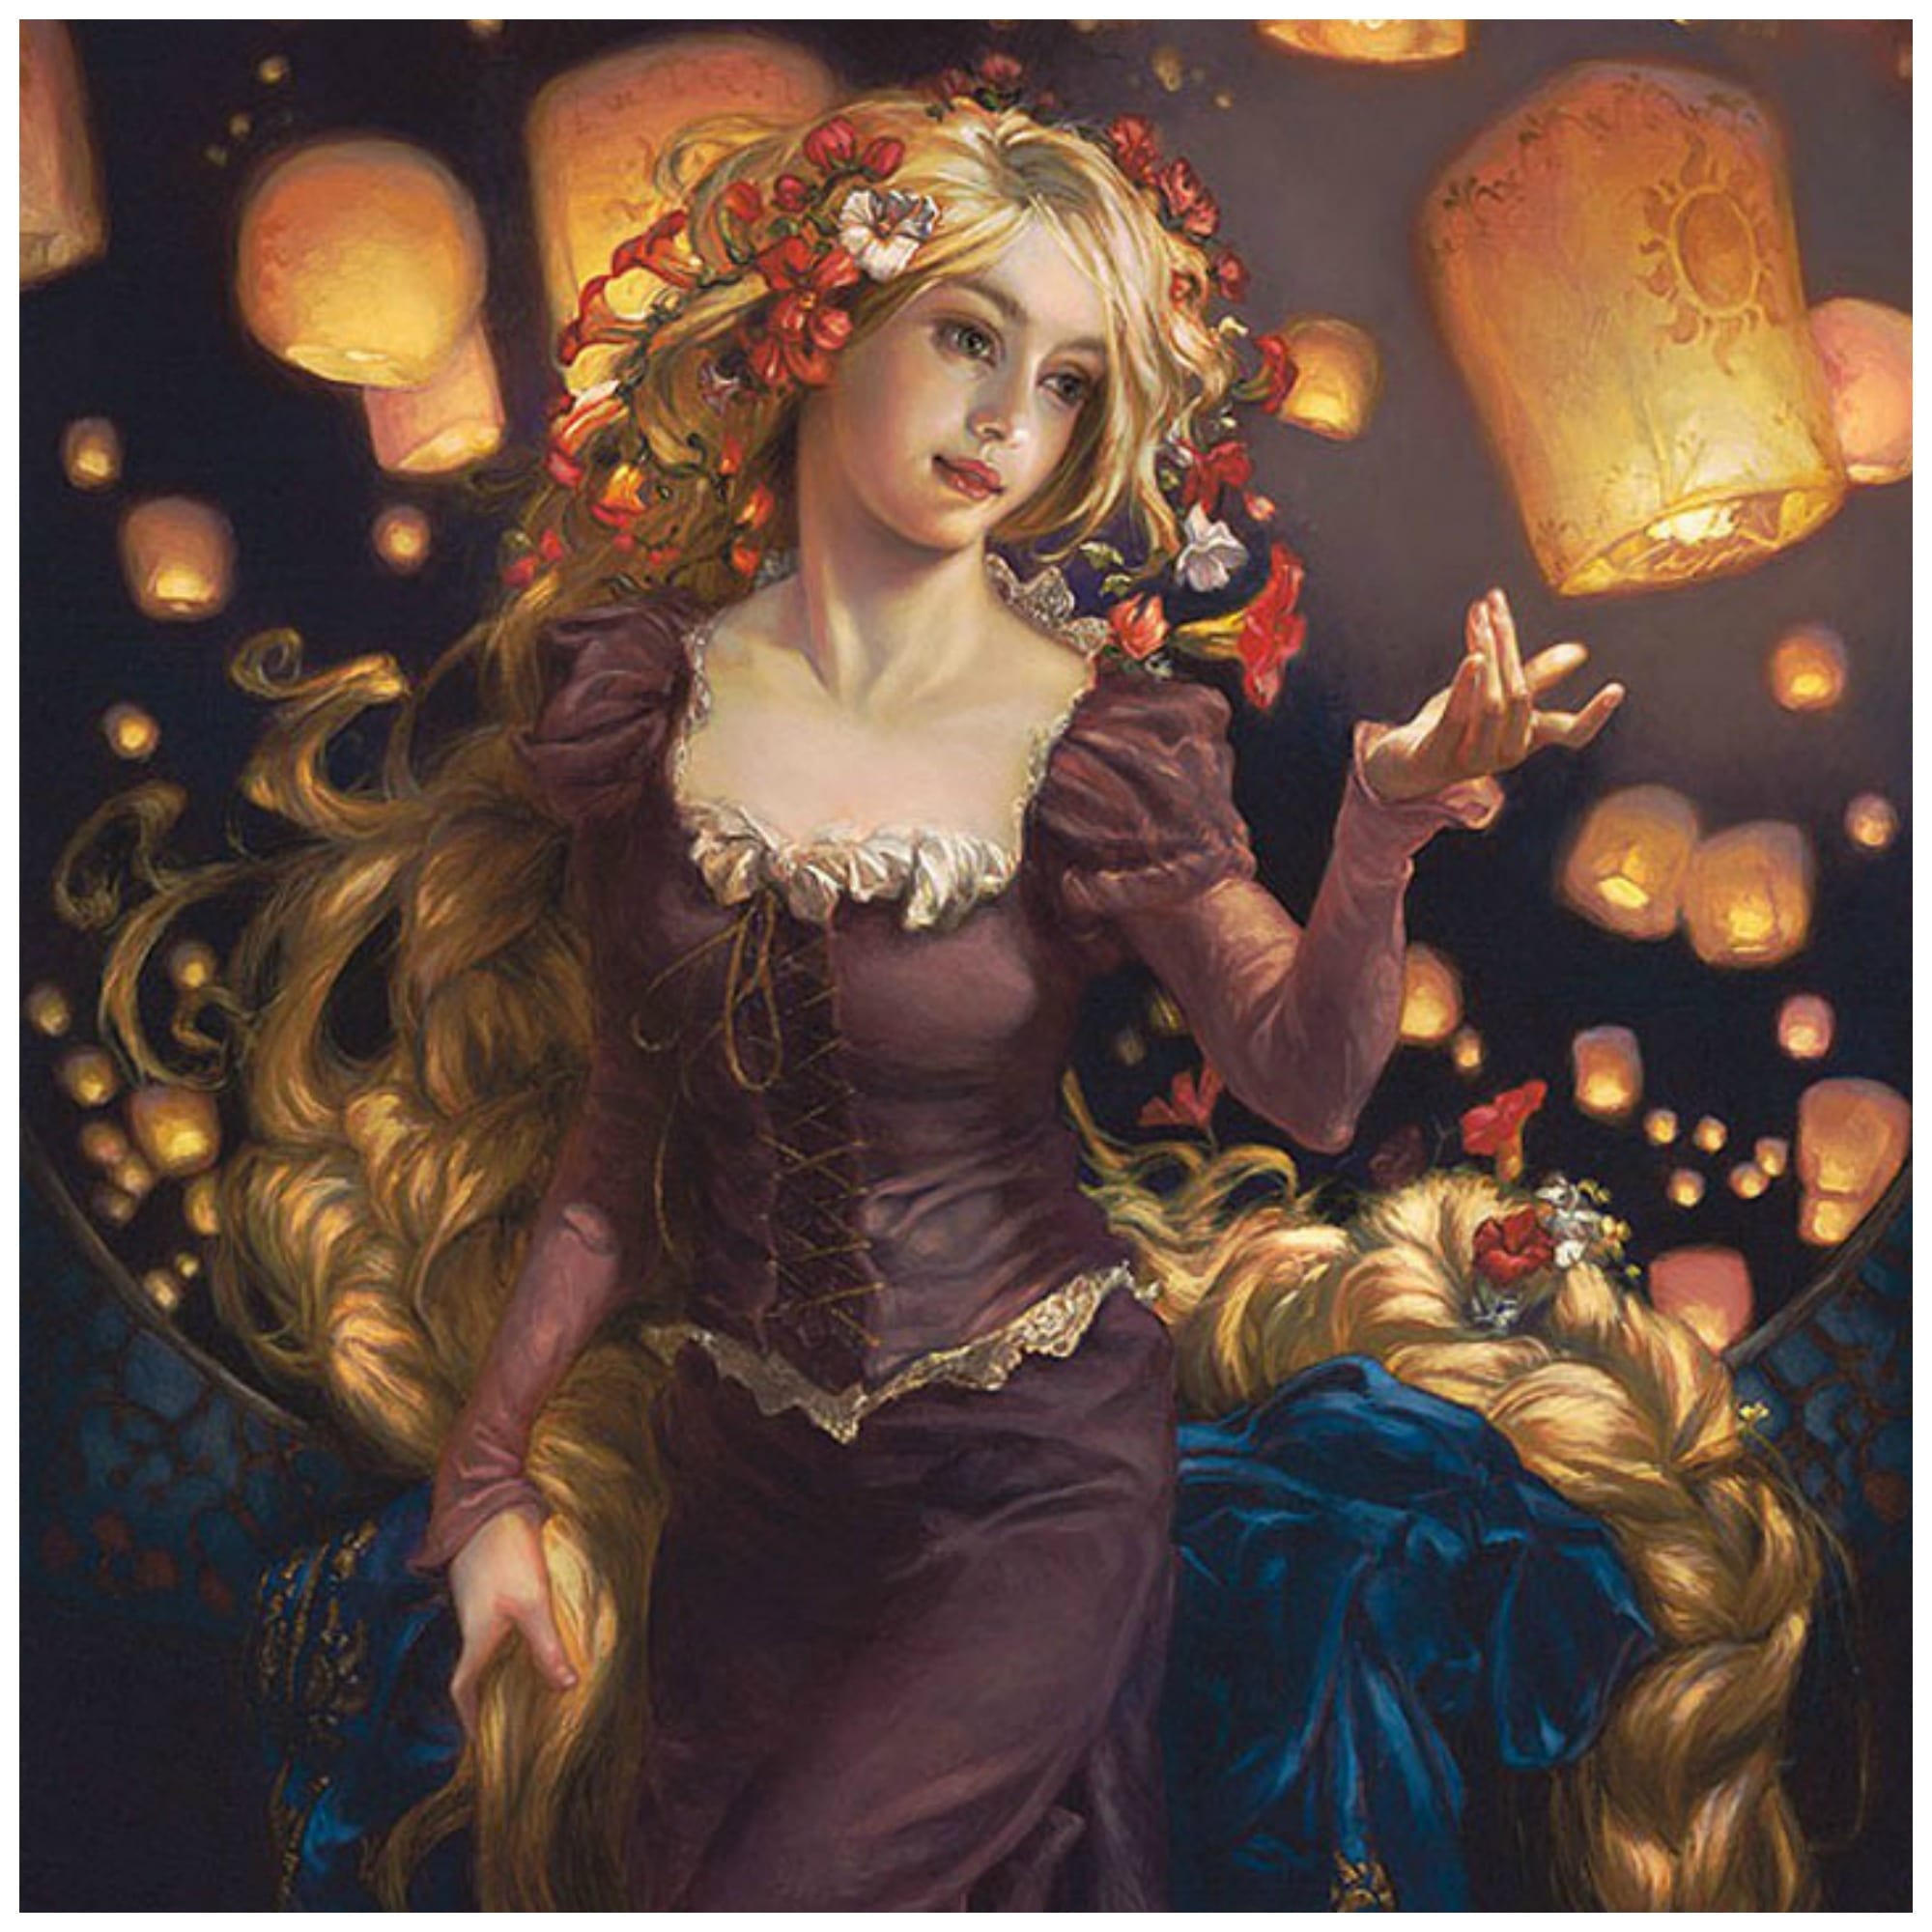 The Lantern Tangled Rapunzel giclee by Michelle St. Laurent